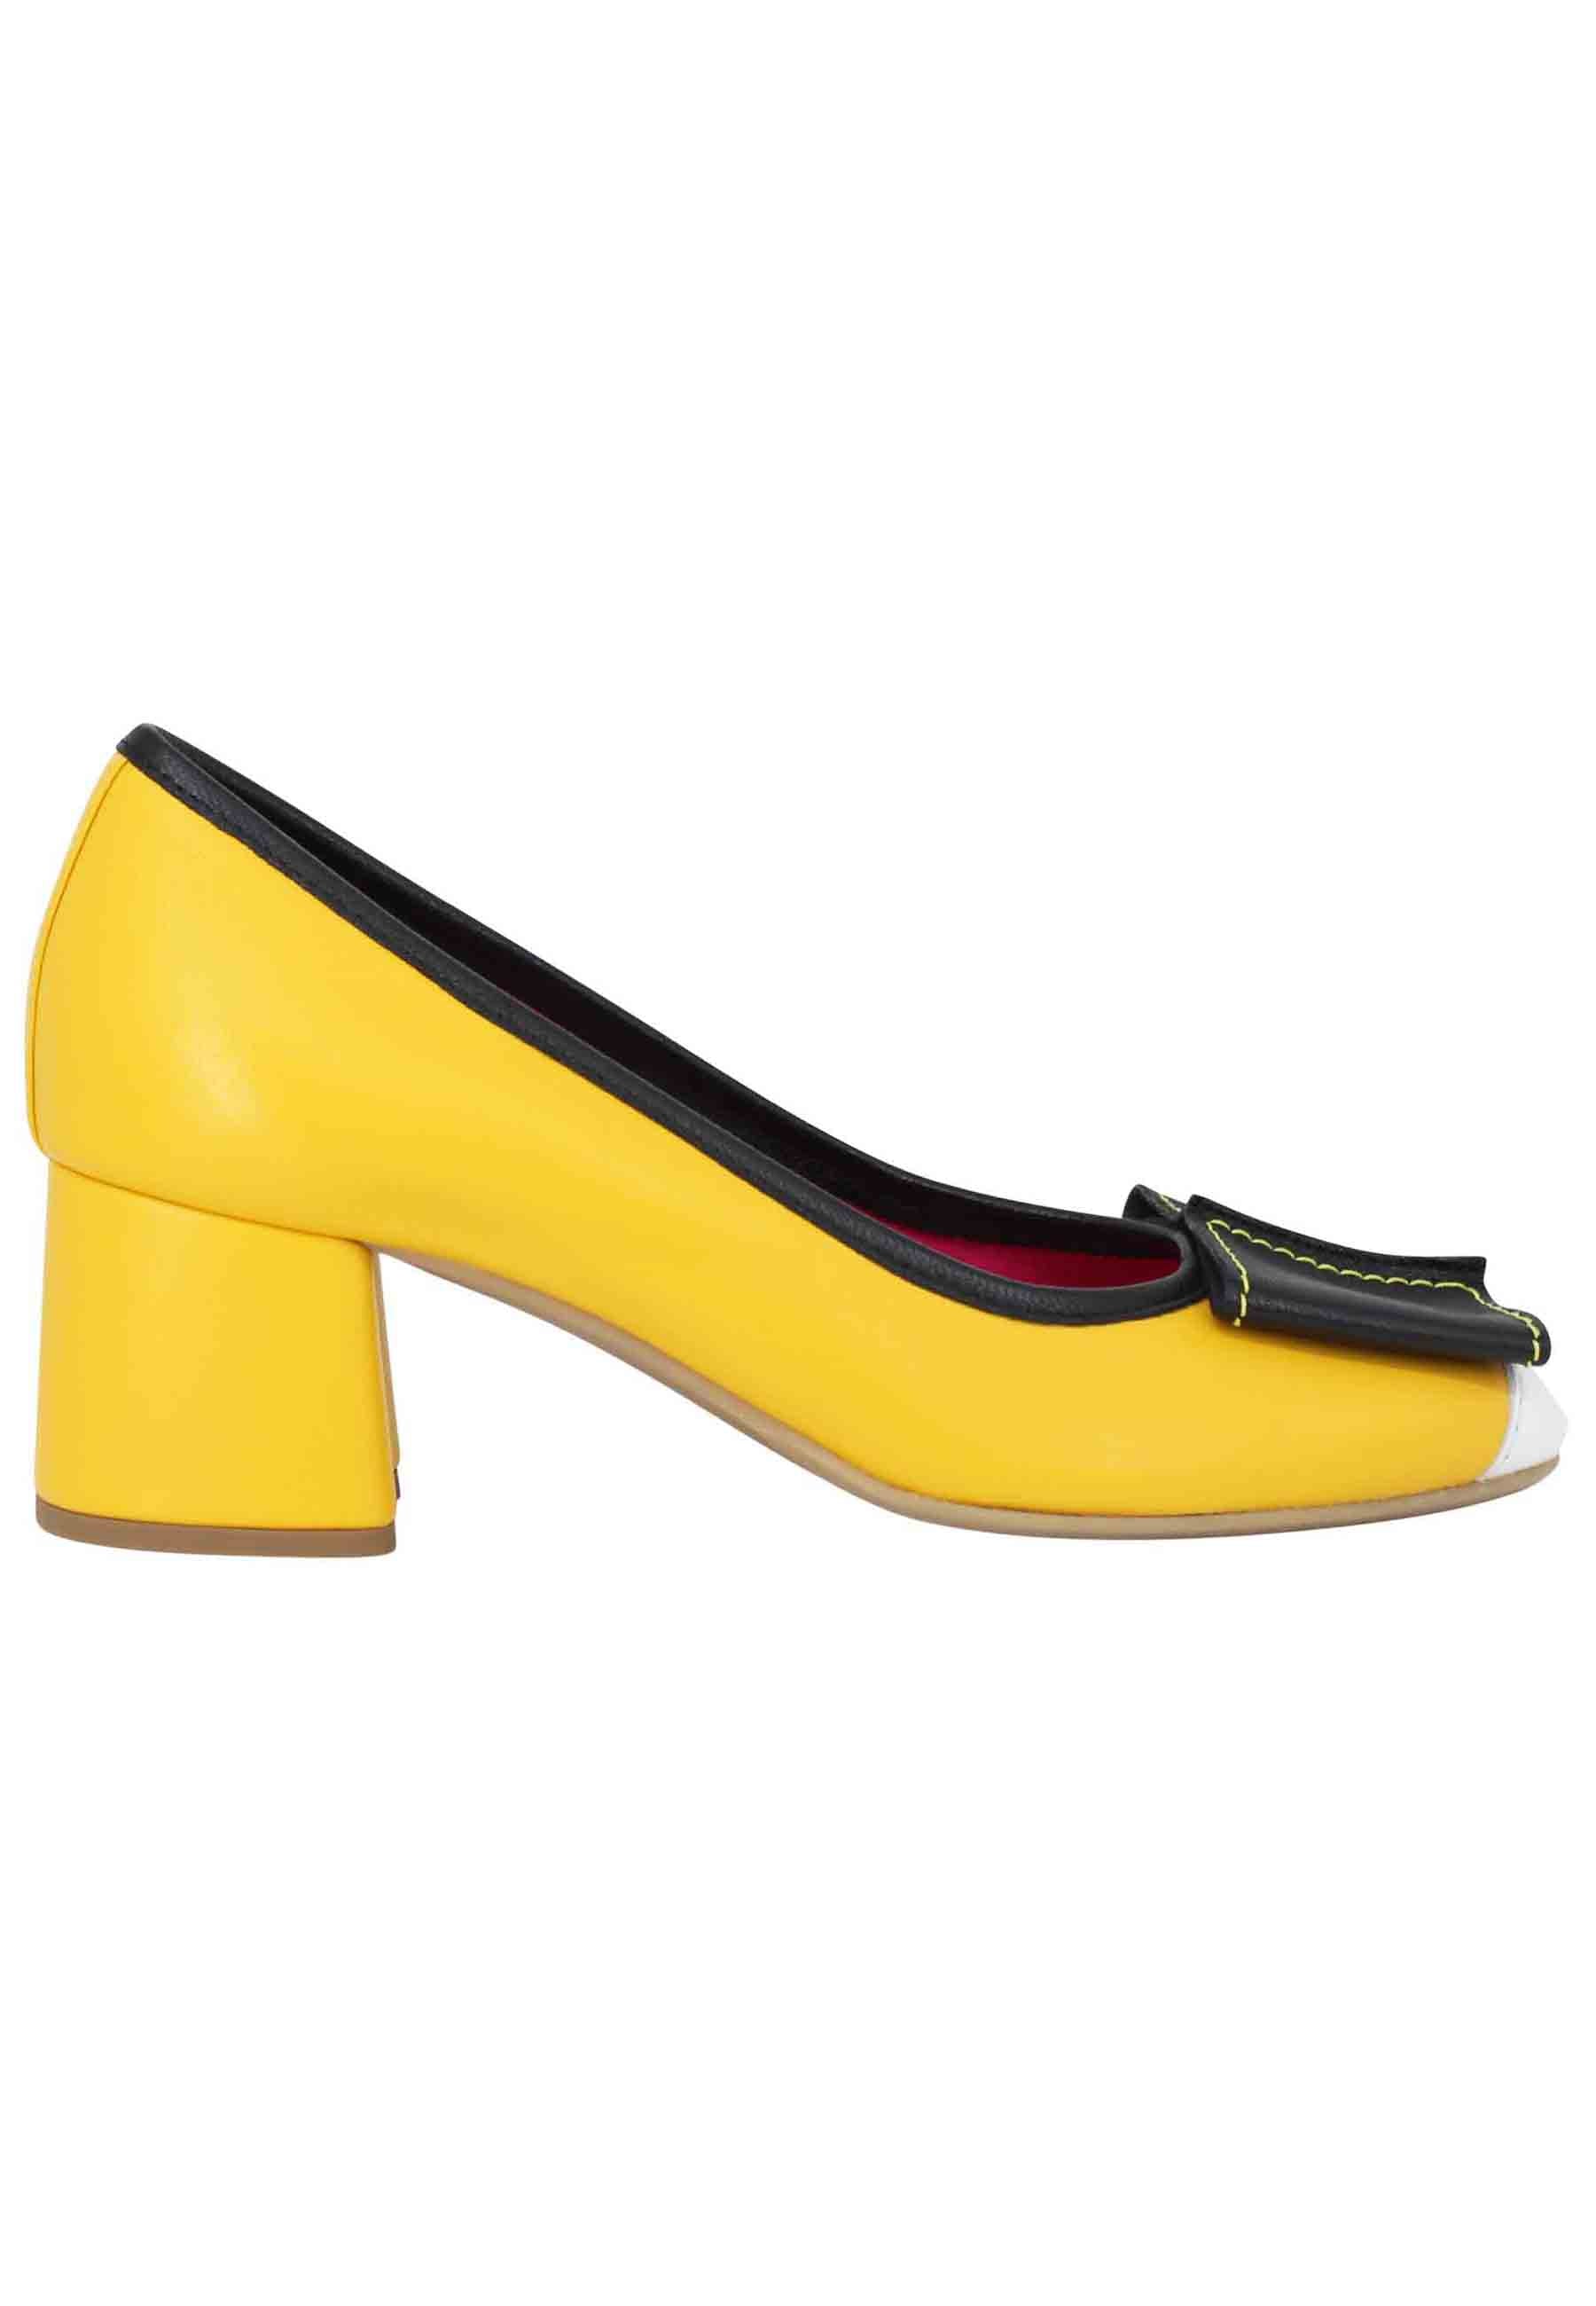 Women's yellow leather pumps with accessory and round toe